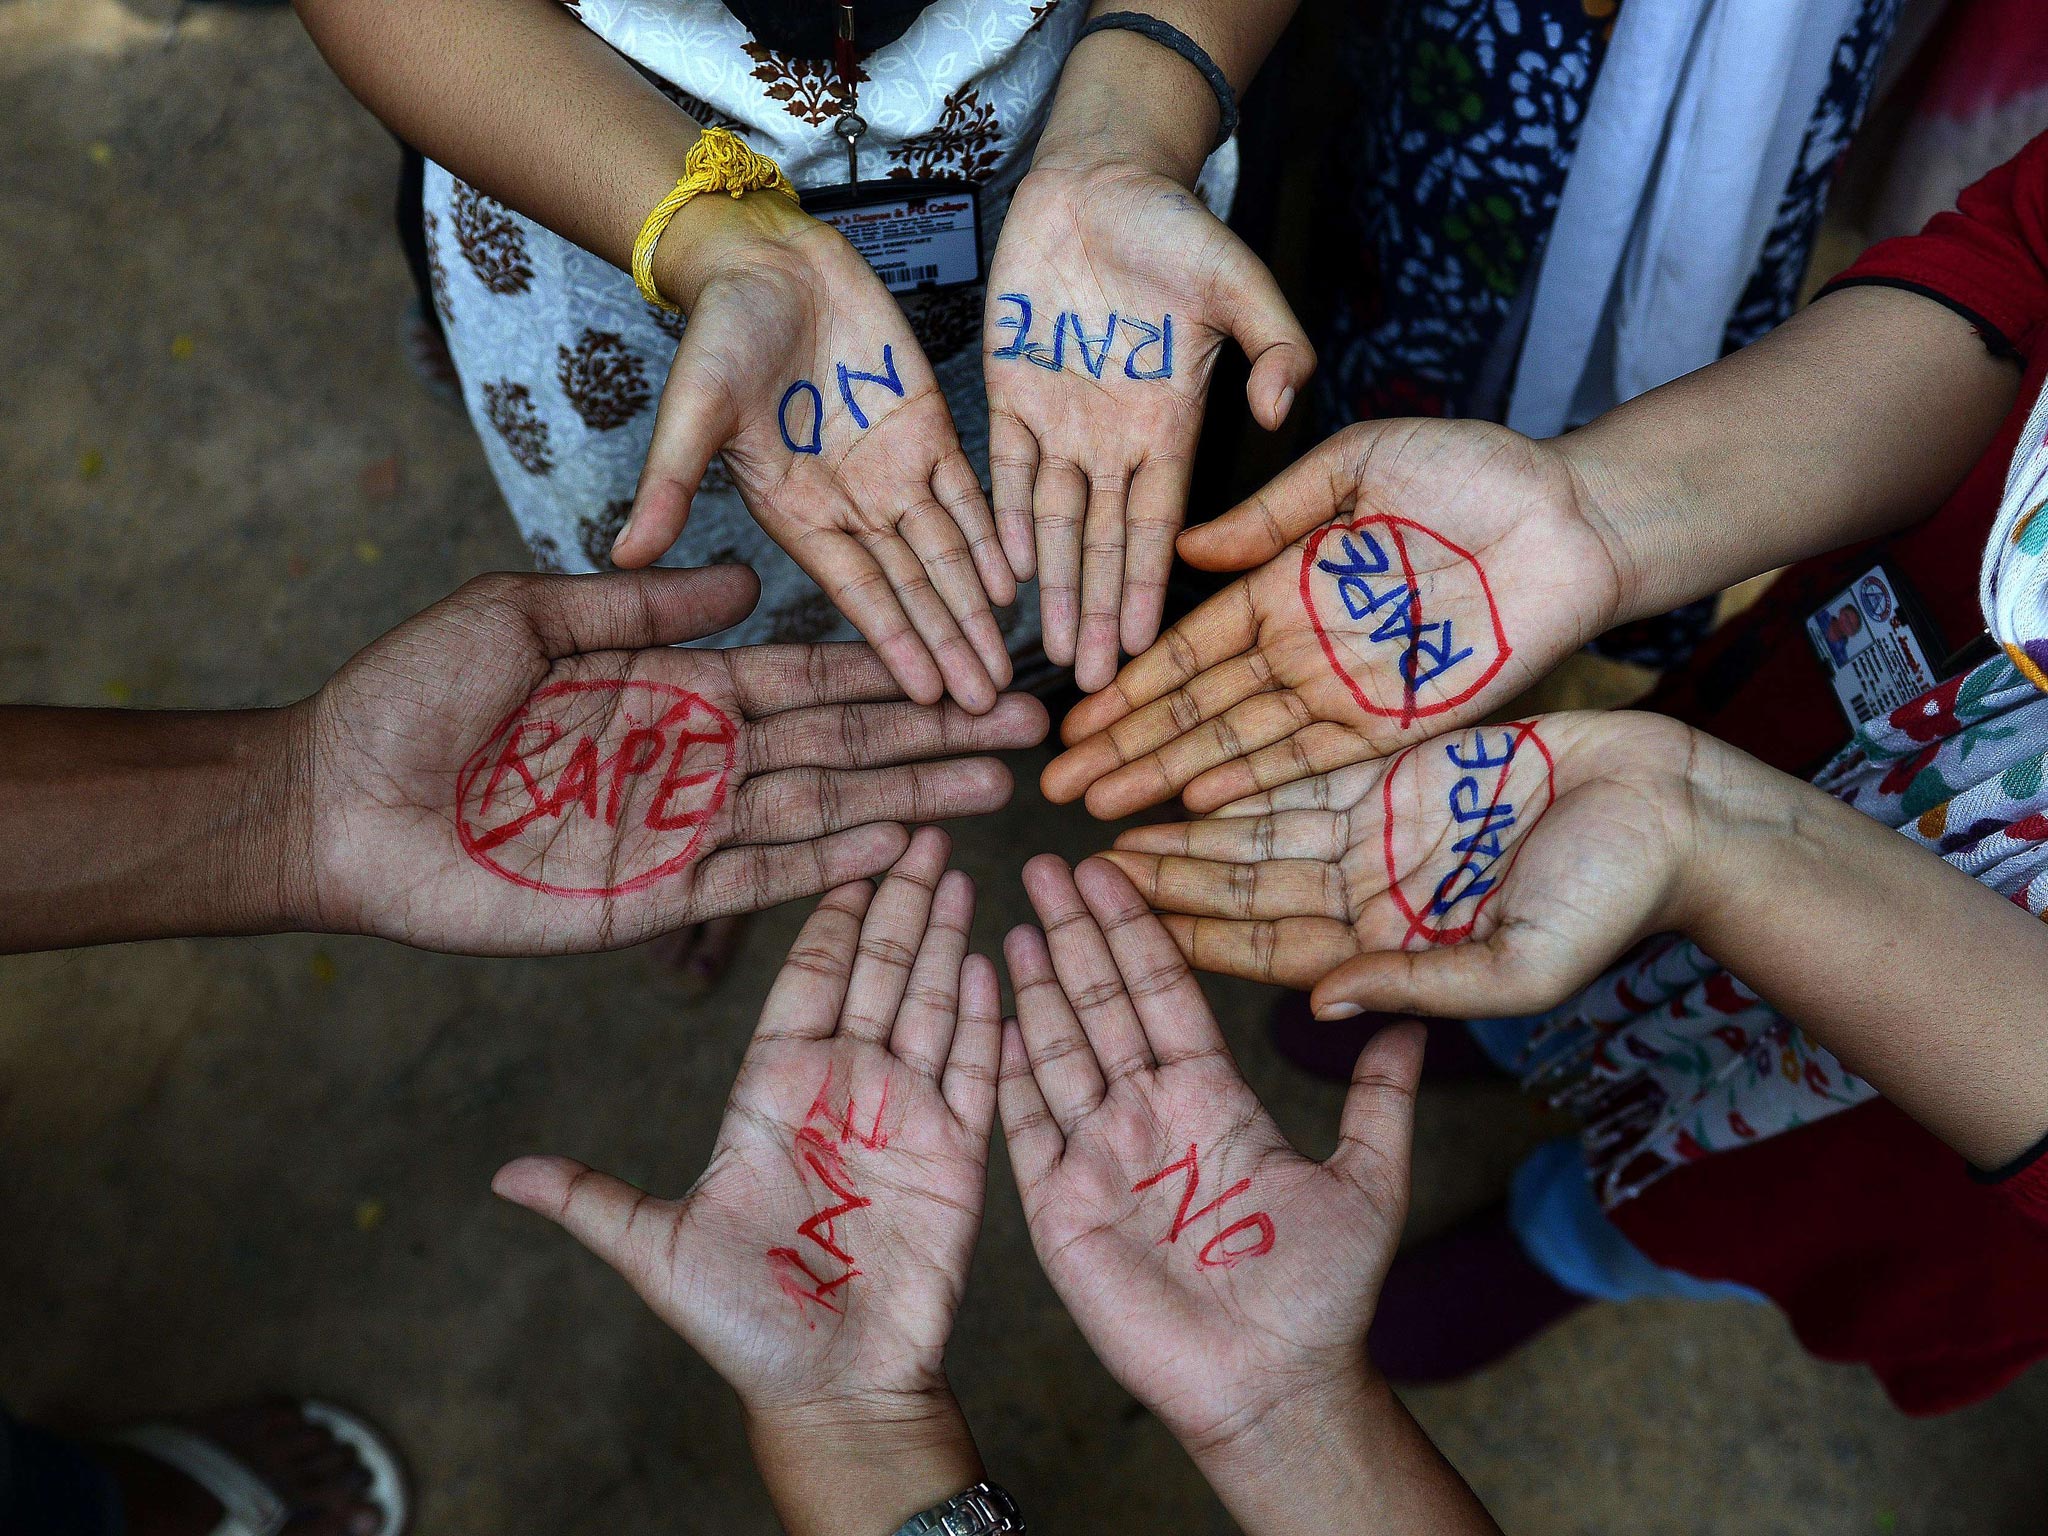 Indian students of Saint Joseph Degree college participate in an anti-rape protest in Hyderabad in September, 2013